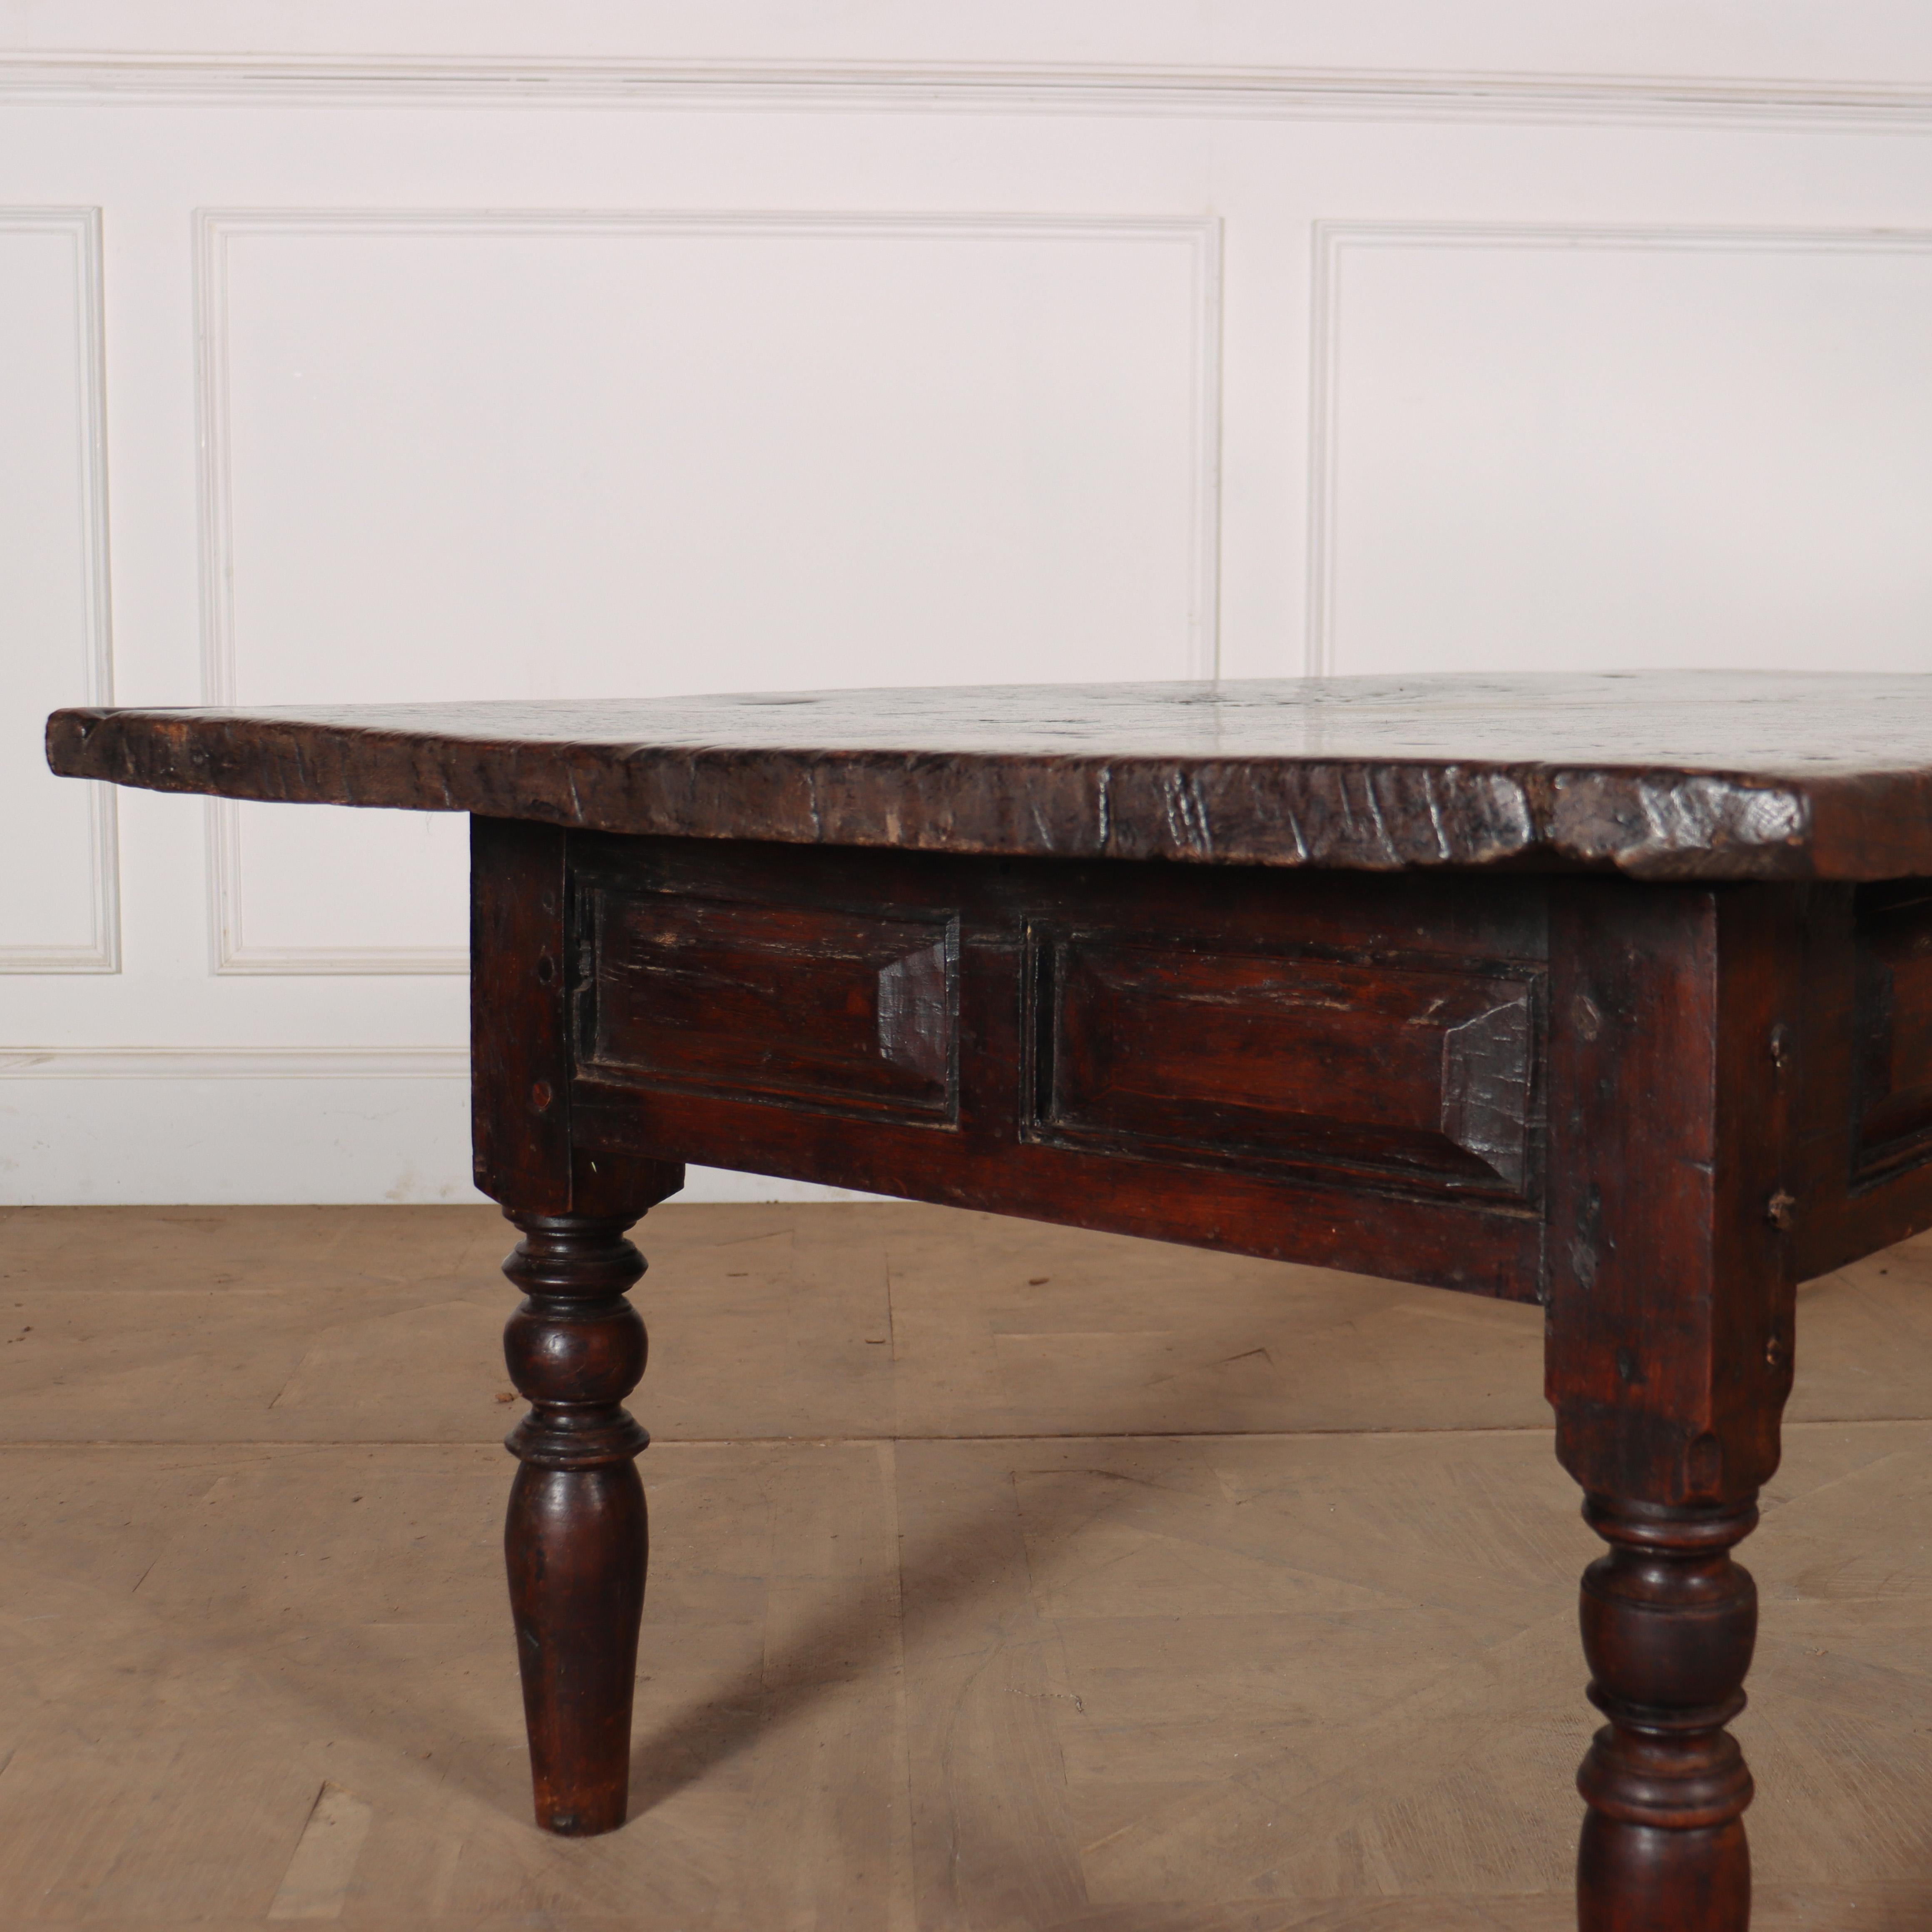 Stunning 18th C Spanish ash and oak coffee table with a 1.5